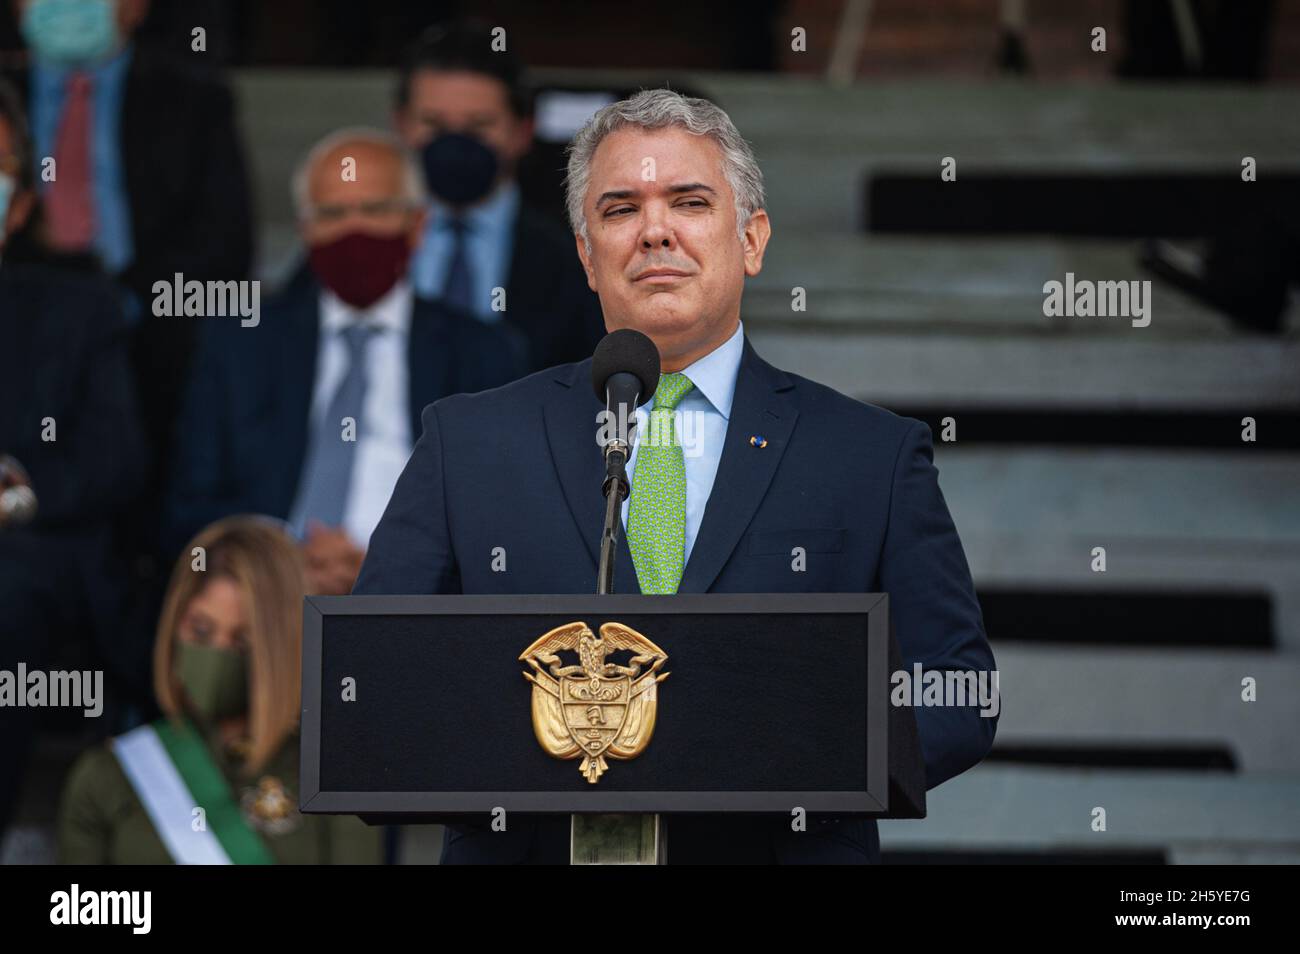 Bogota, Colombia. 11th Nov, 2021. Colombia's president, Ivan Duque Marquez gives a speech during an event were Colombia's president Ivan Duque Marquez and Colombia's Minister of Defense Diego Molano in conmmemoration of the 130 anniversary of Colombia's National Police and the promotion to officers to more than a 100 police members, in Bogota, Colombia on November 11, 2021. Credit: Long Visual Press/Alamy Live News Stock Photo